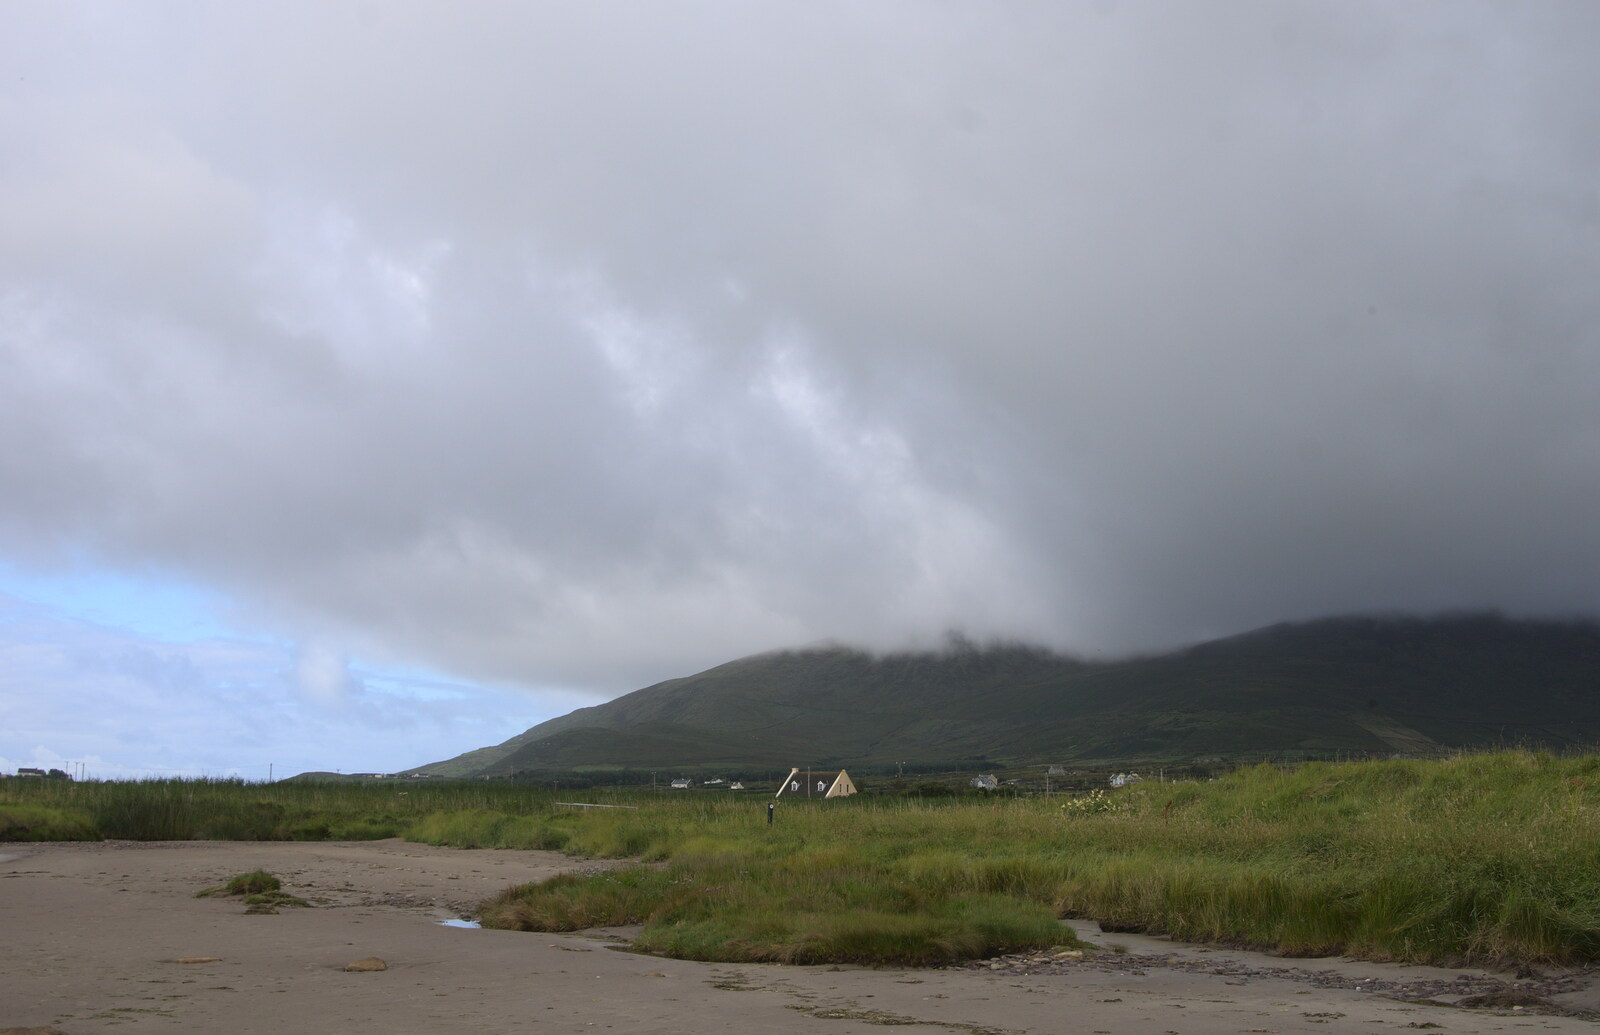 The low clouds cling to the mountain top from Baile an Sceilg to An tSnaidhme, Co. Kerry, Ireland - 31st July 2017